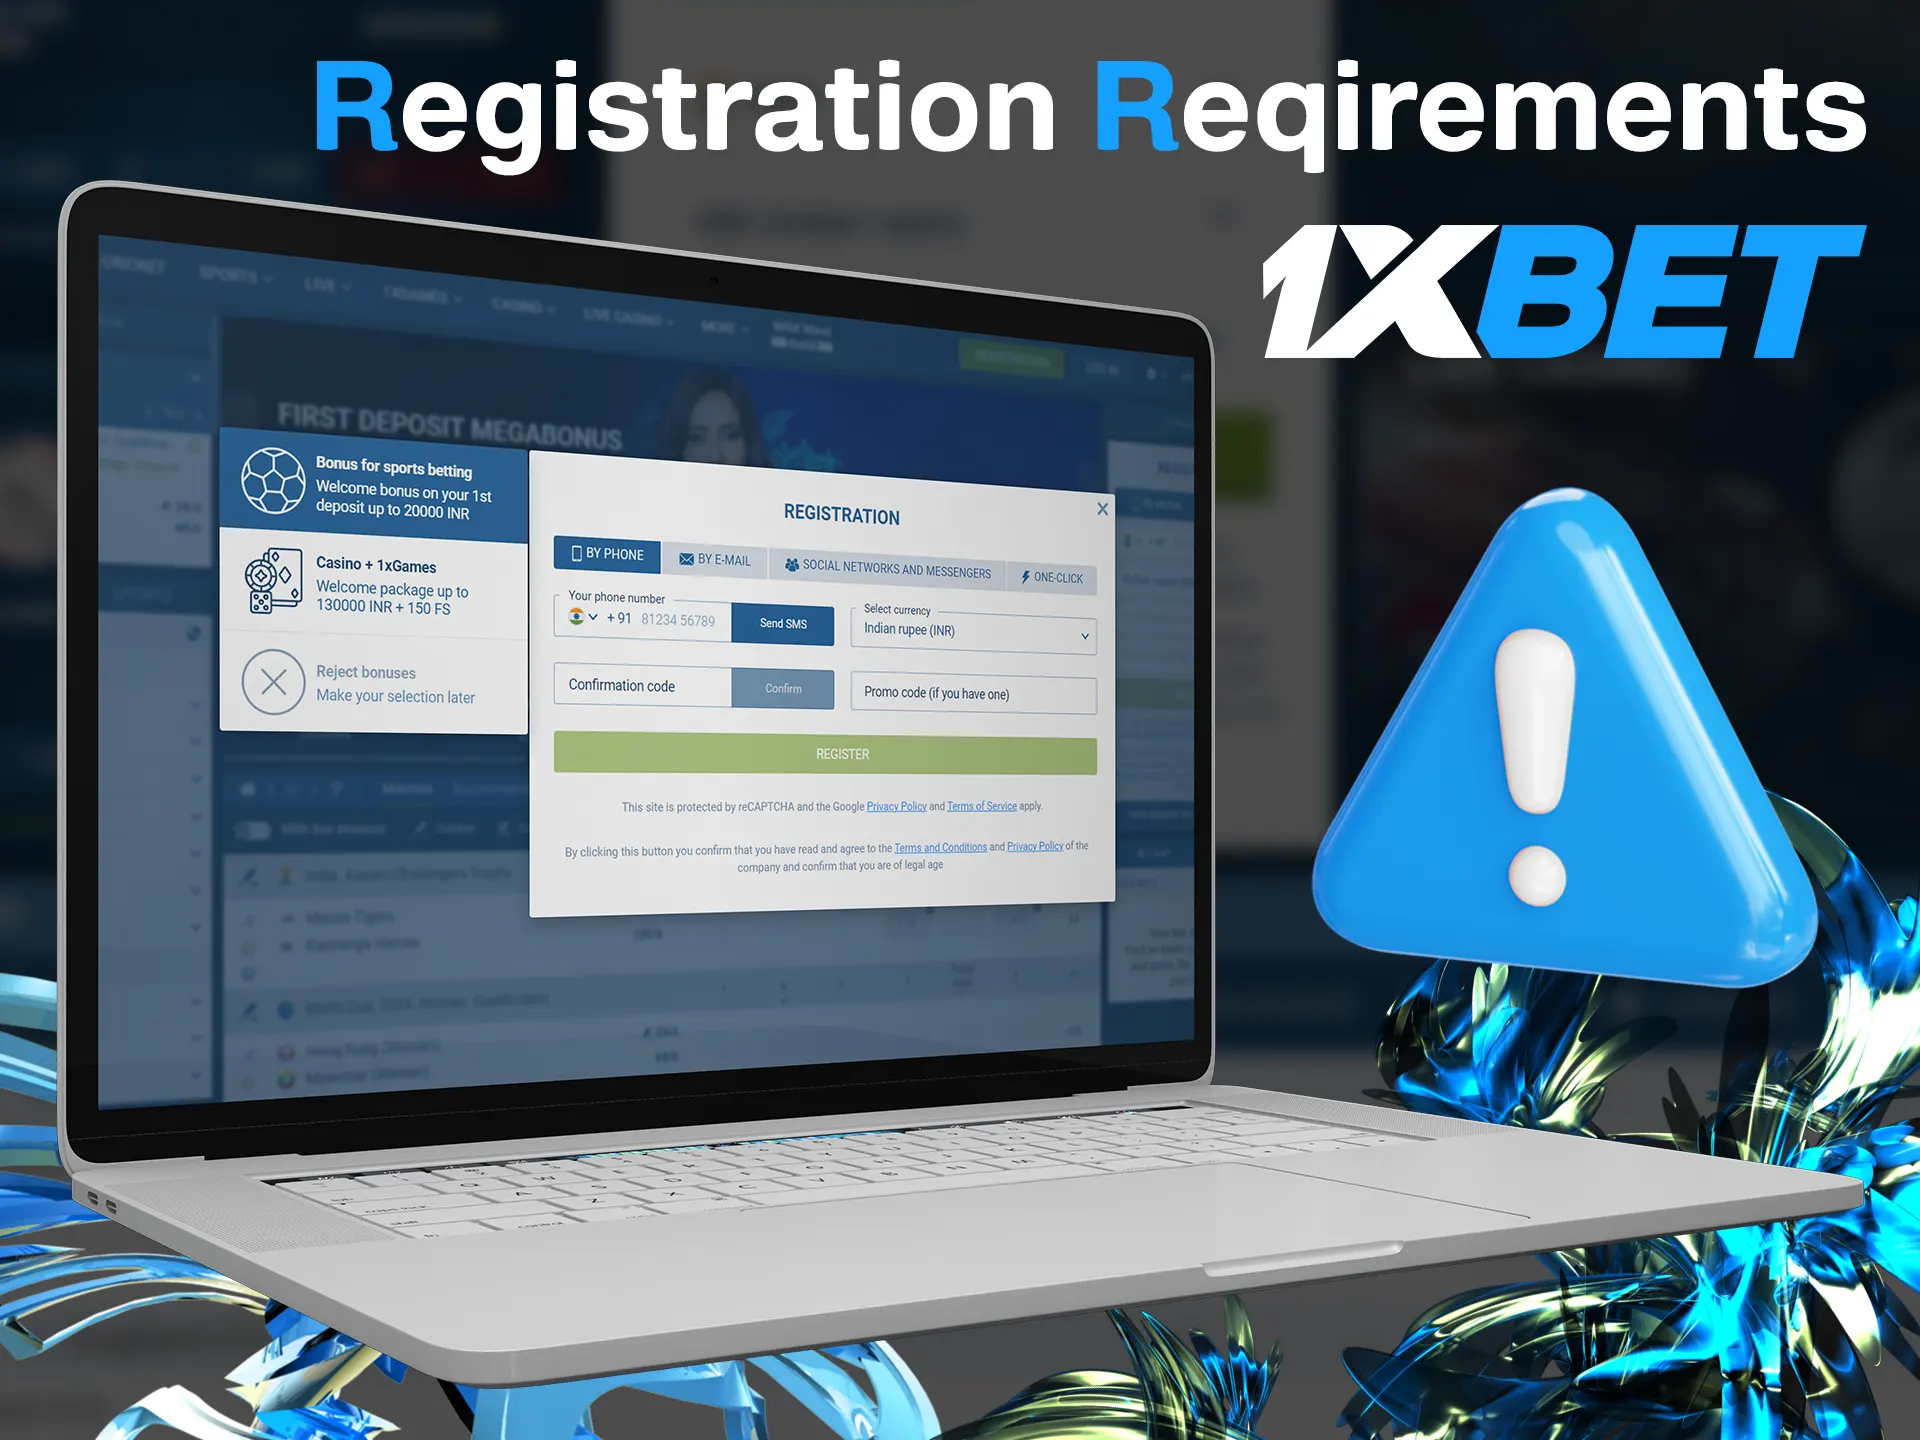 Follow all of the 1xbet account registration requirements.